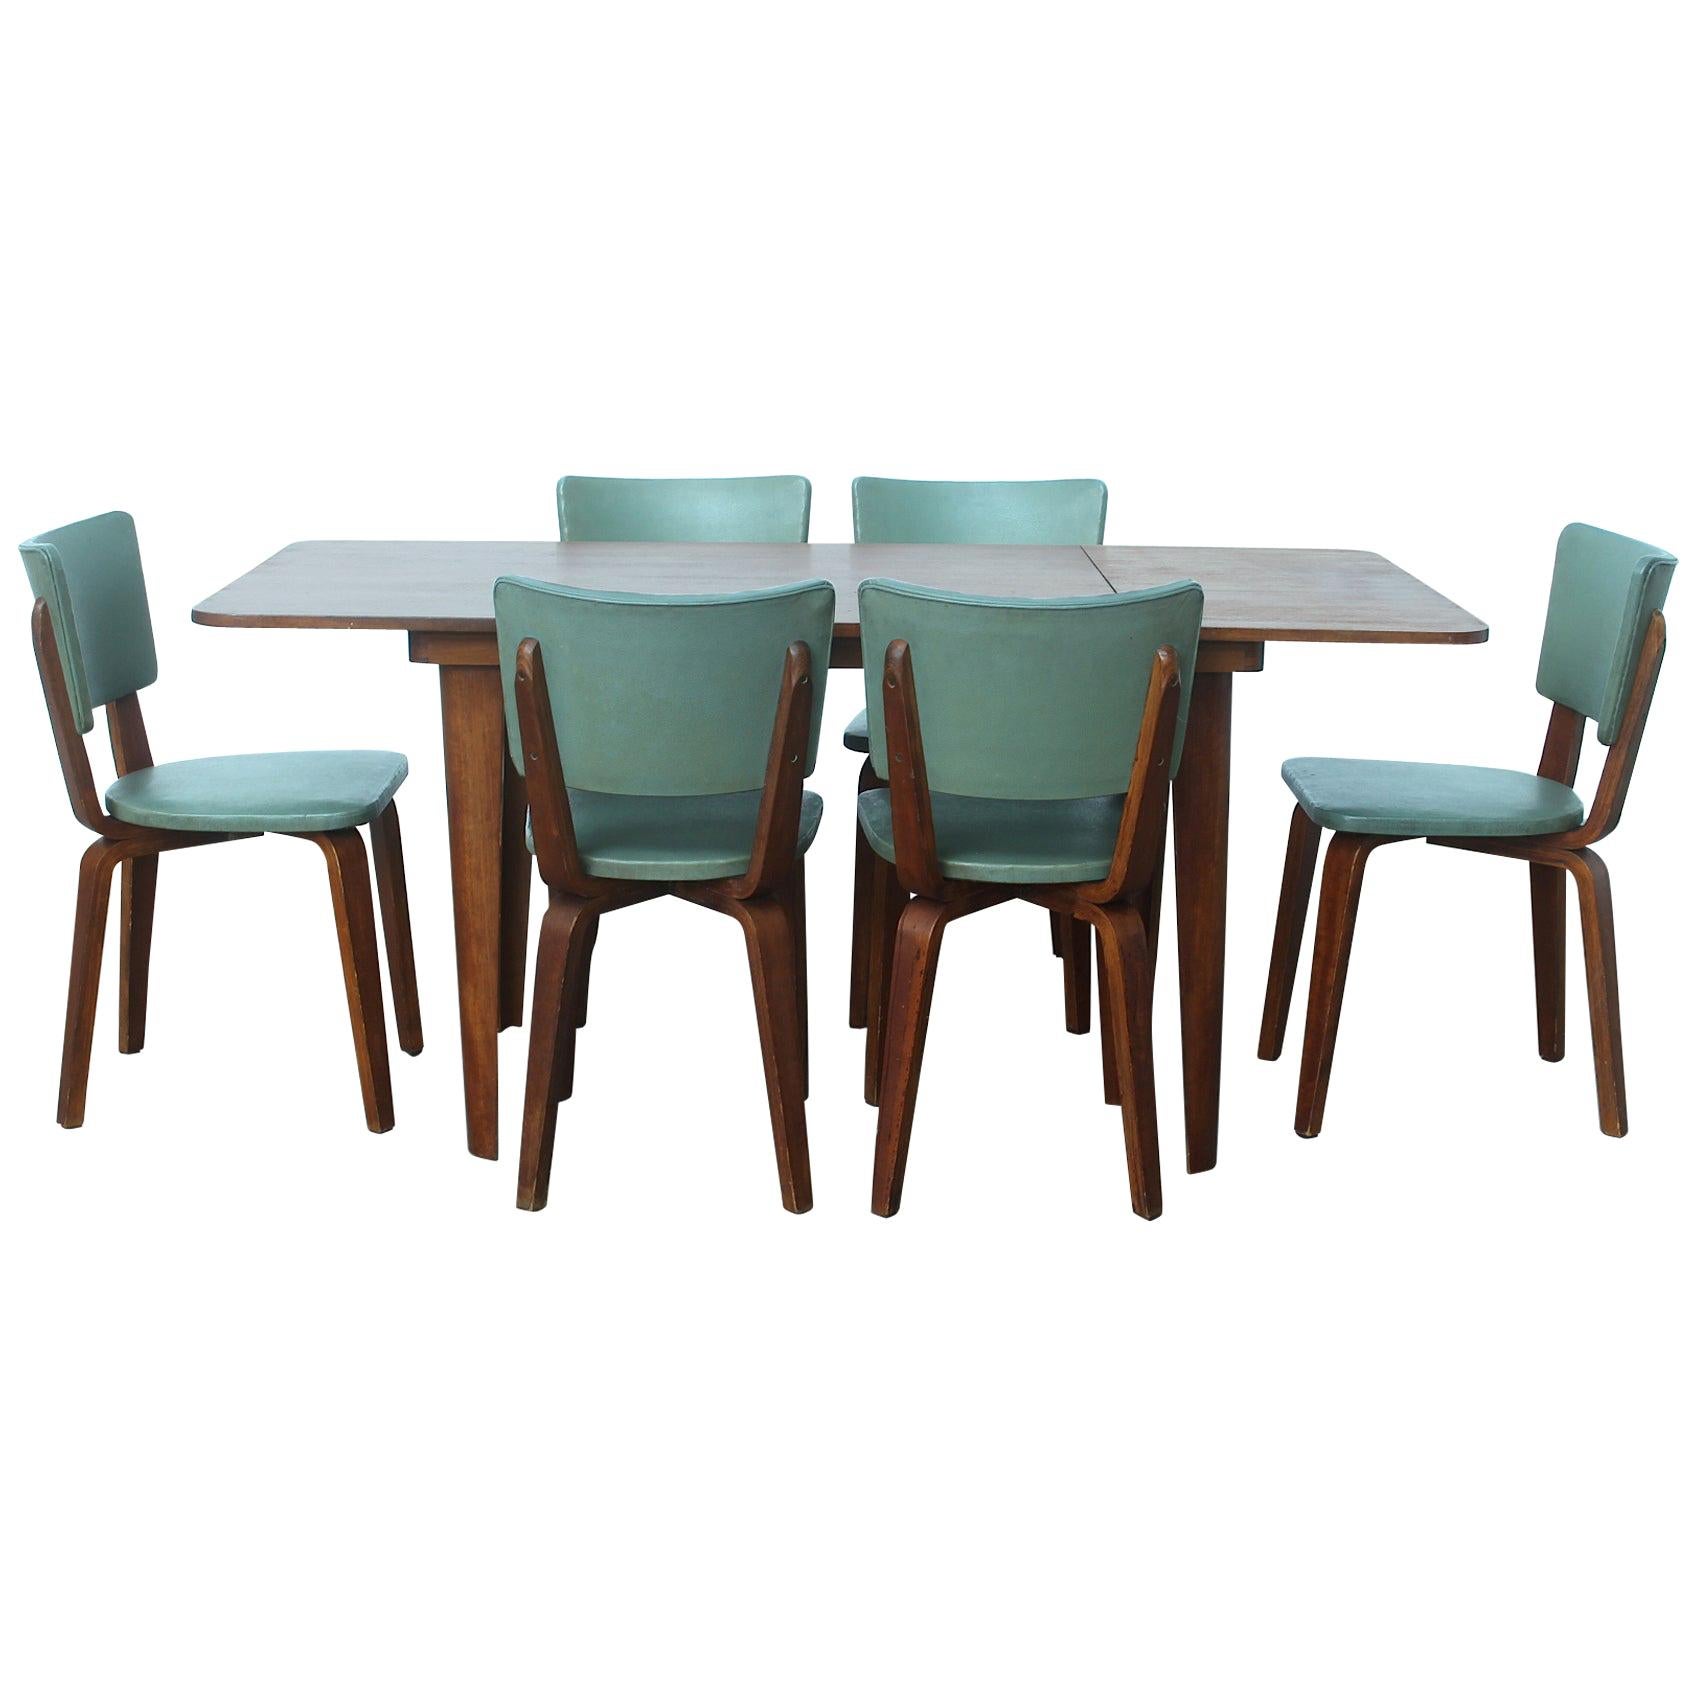 Cor Alons Plywood Dining Set by Gouda Den Boer Holland